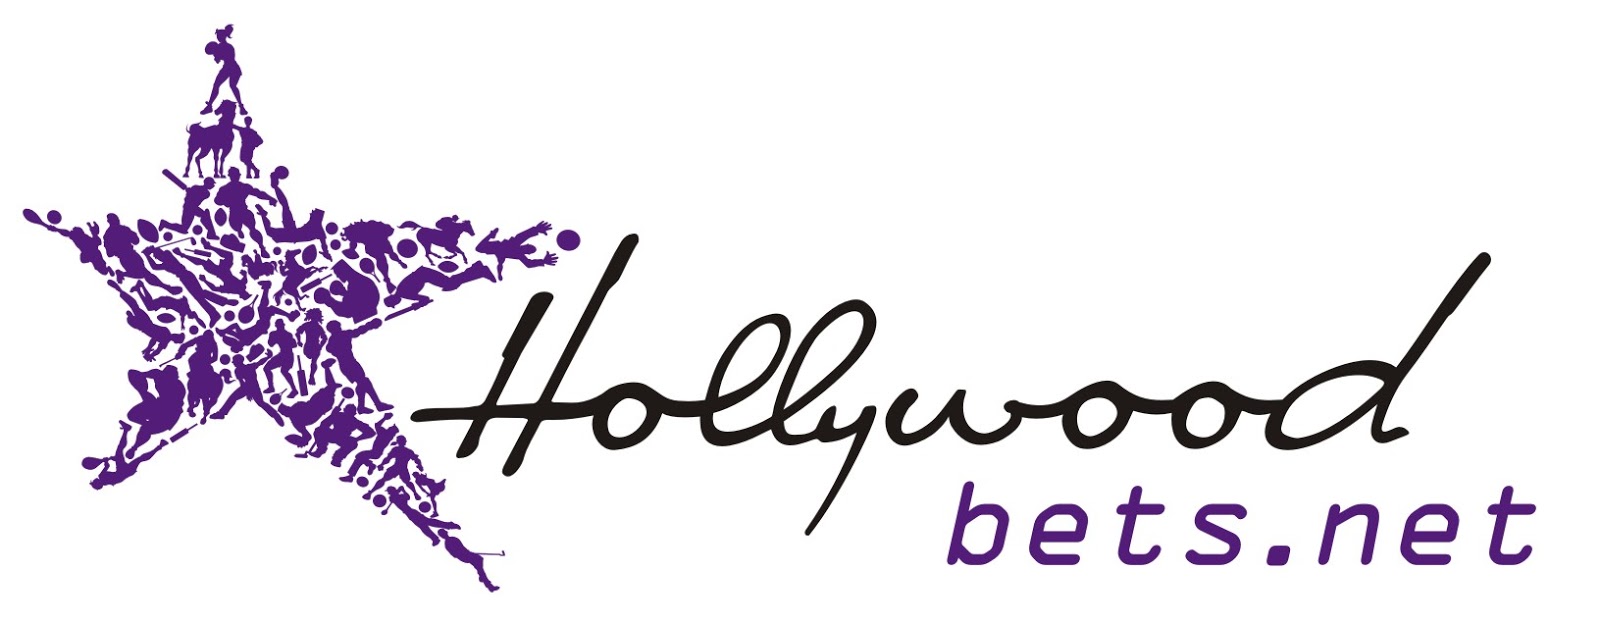 Hollywoodbets Sports Blog: Summer Cup Special - 15% Bonus On Now!